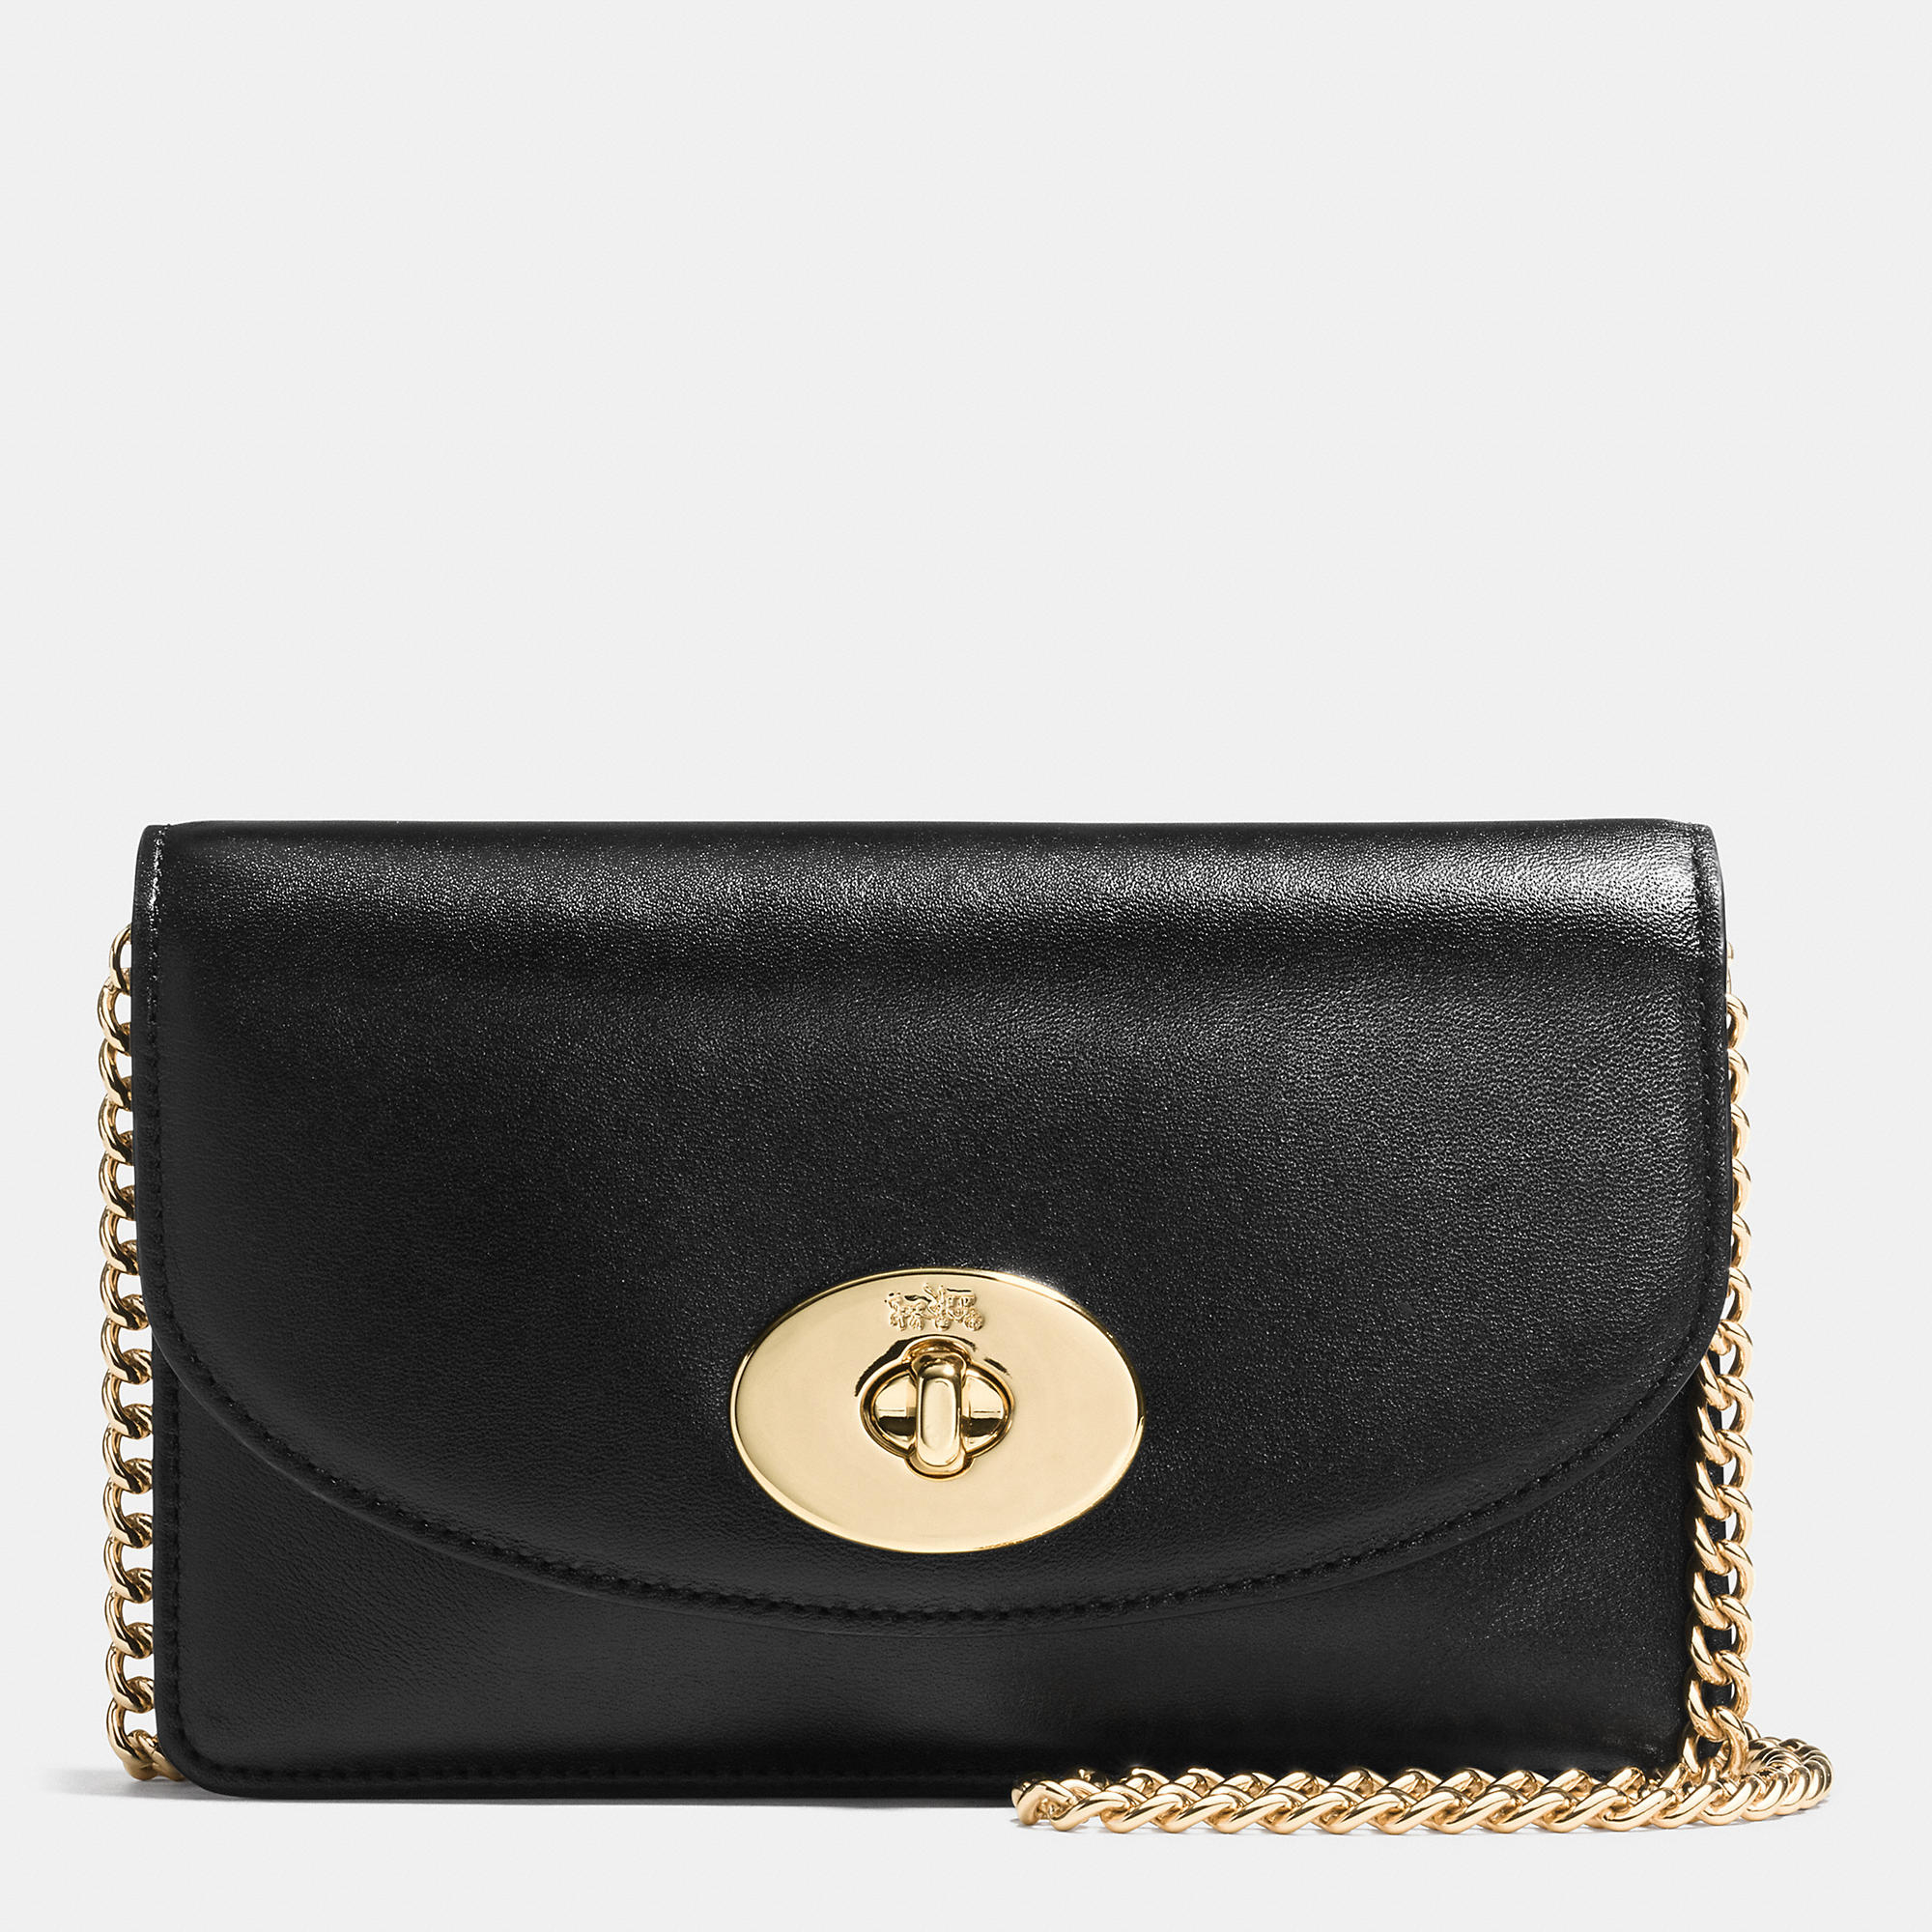 Lyst - Coach Clutch Chain Wallet In Smooth Leather in Metallic